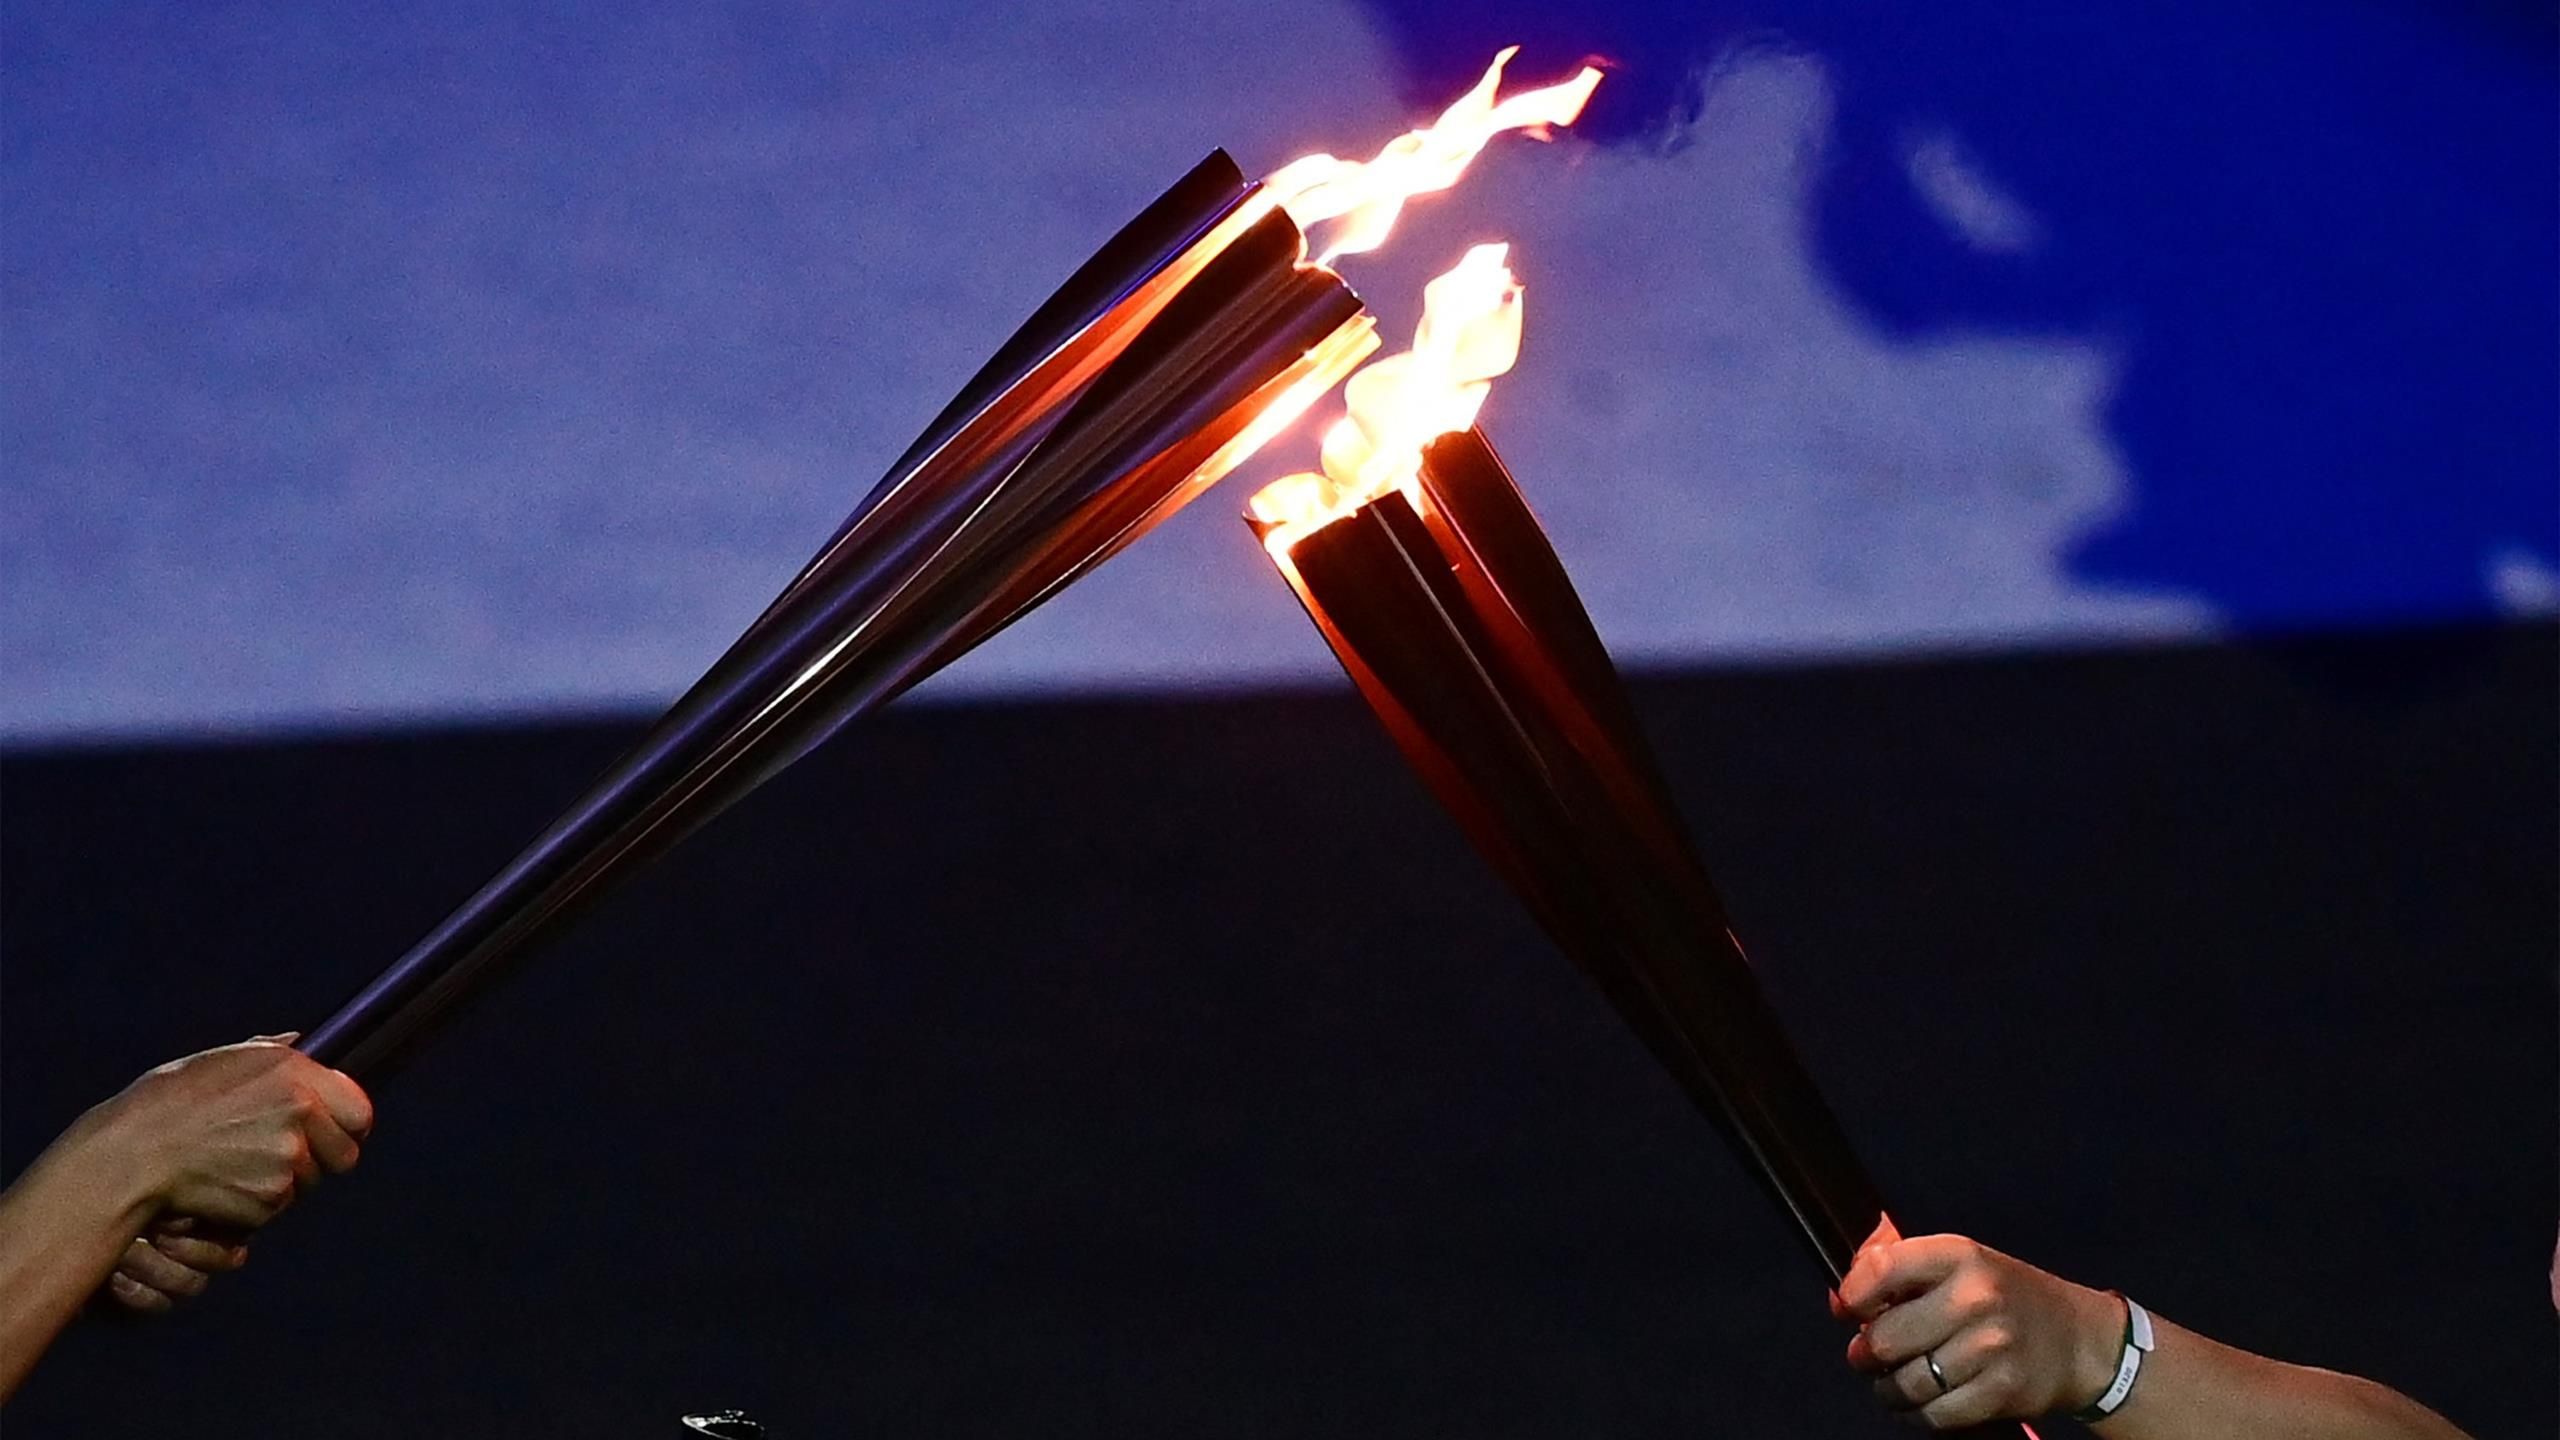 Paris 2024 Olympic Games torch relay journey revealed, with flame to